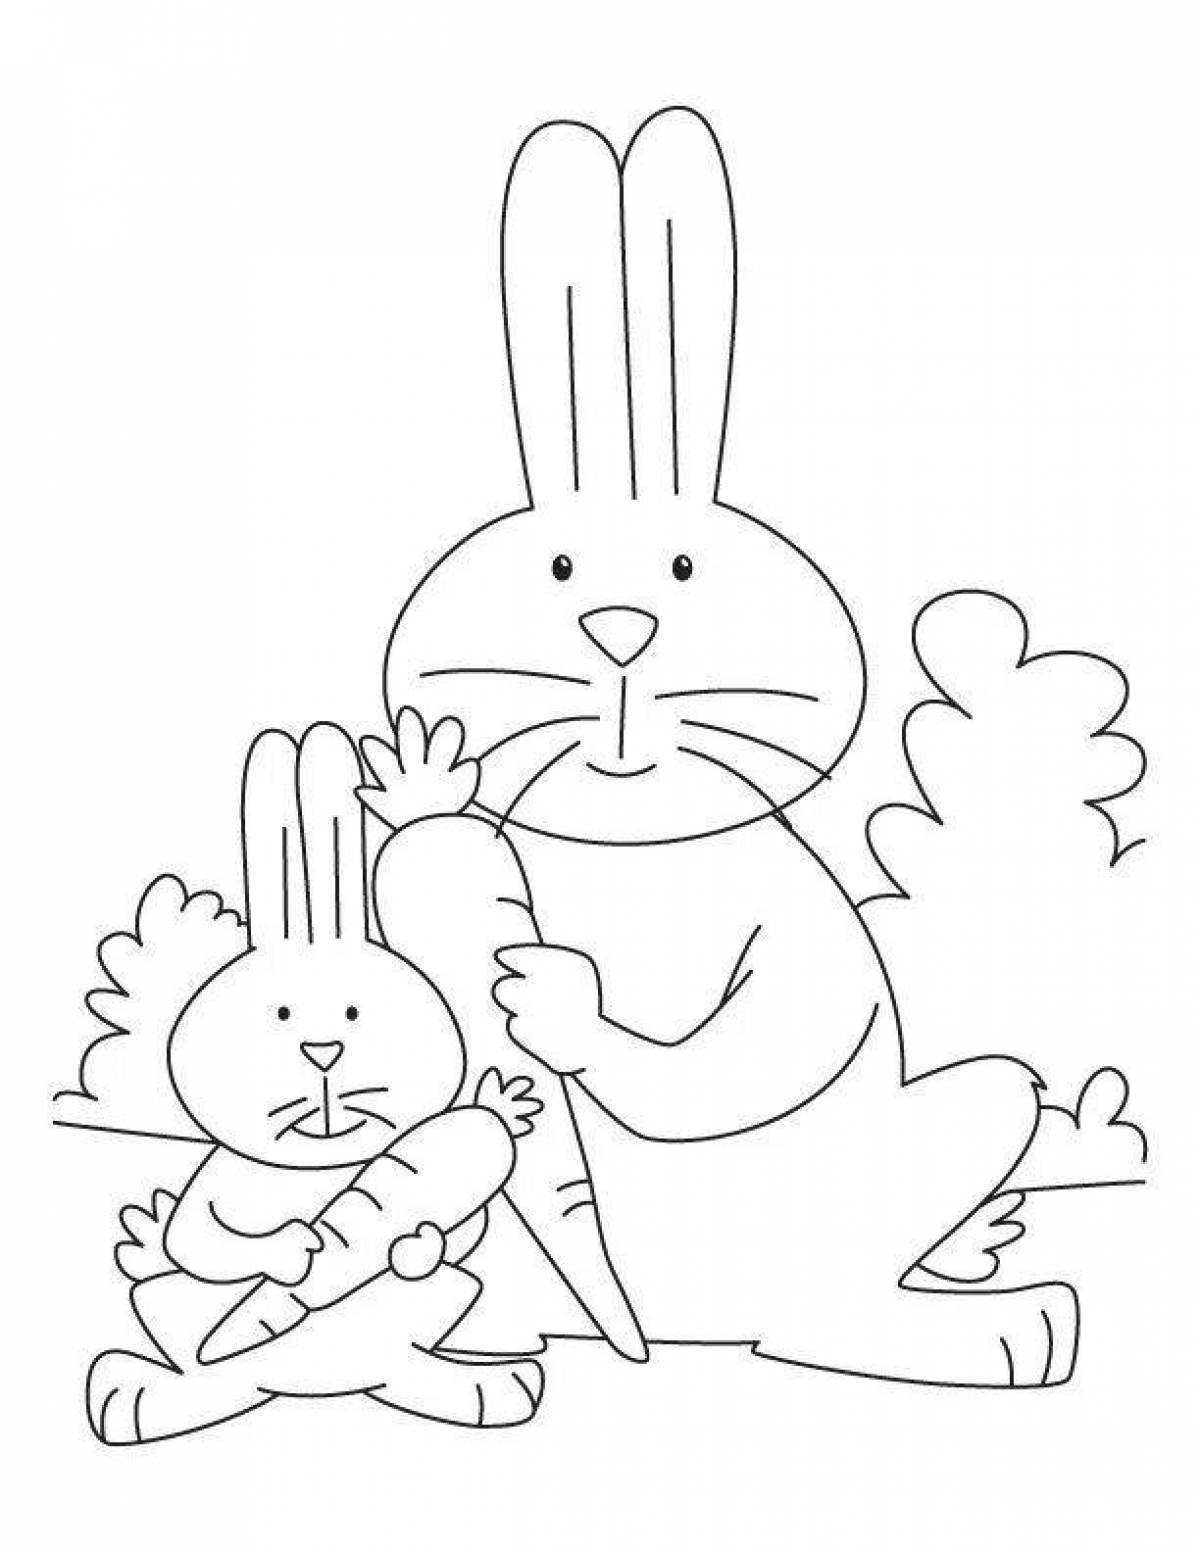 Coloring page gorgeous cat and hare